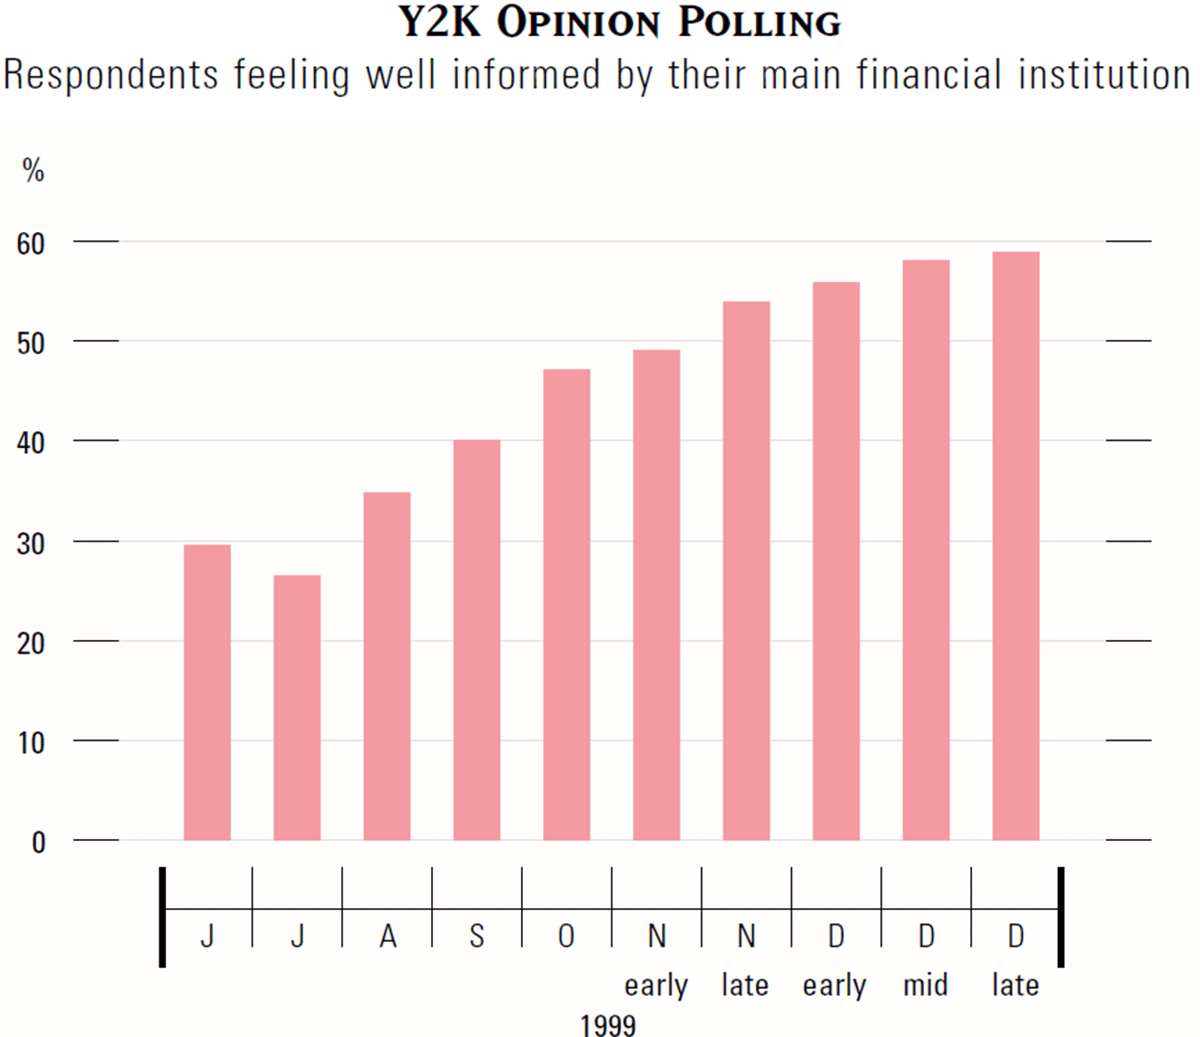 Graph showing Y2K Opinion Polling